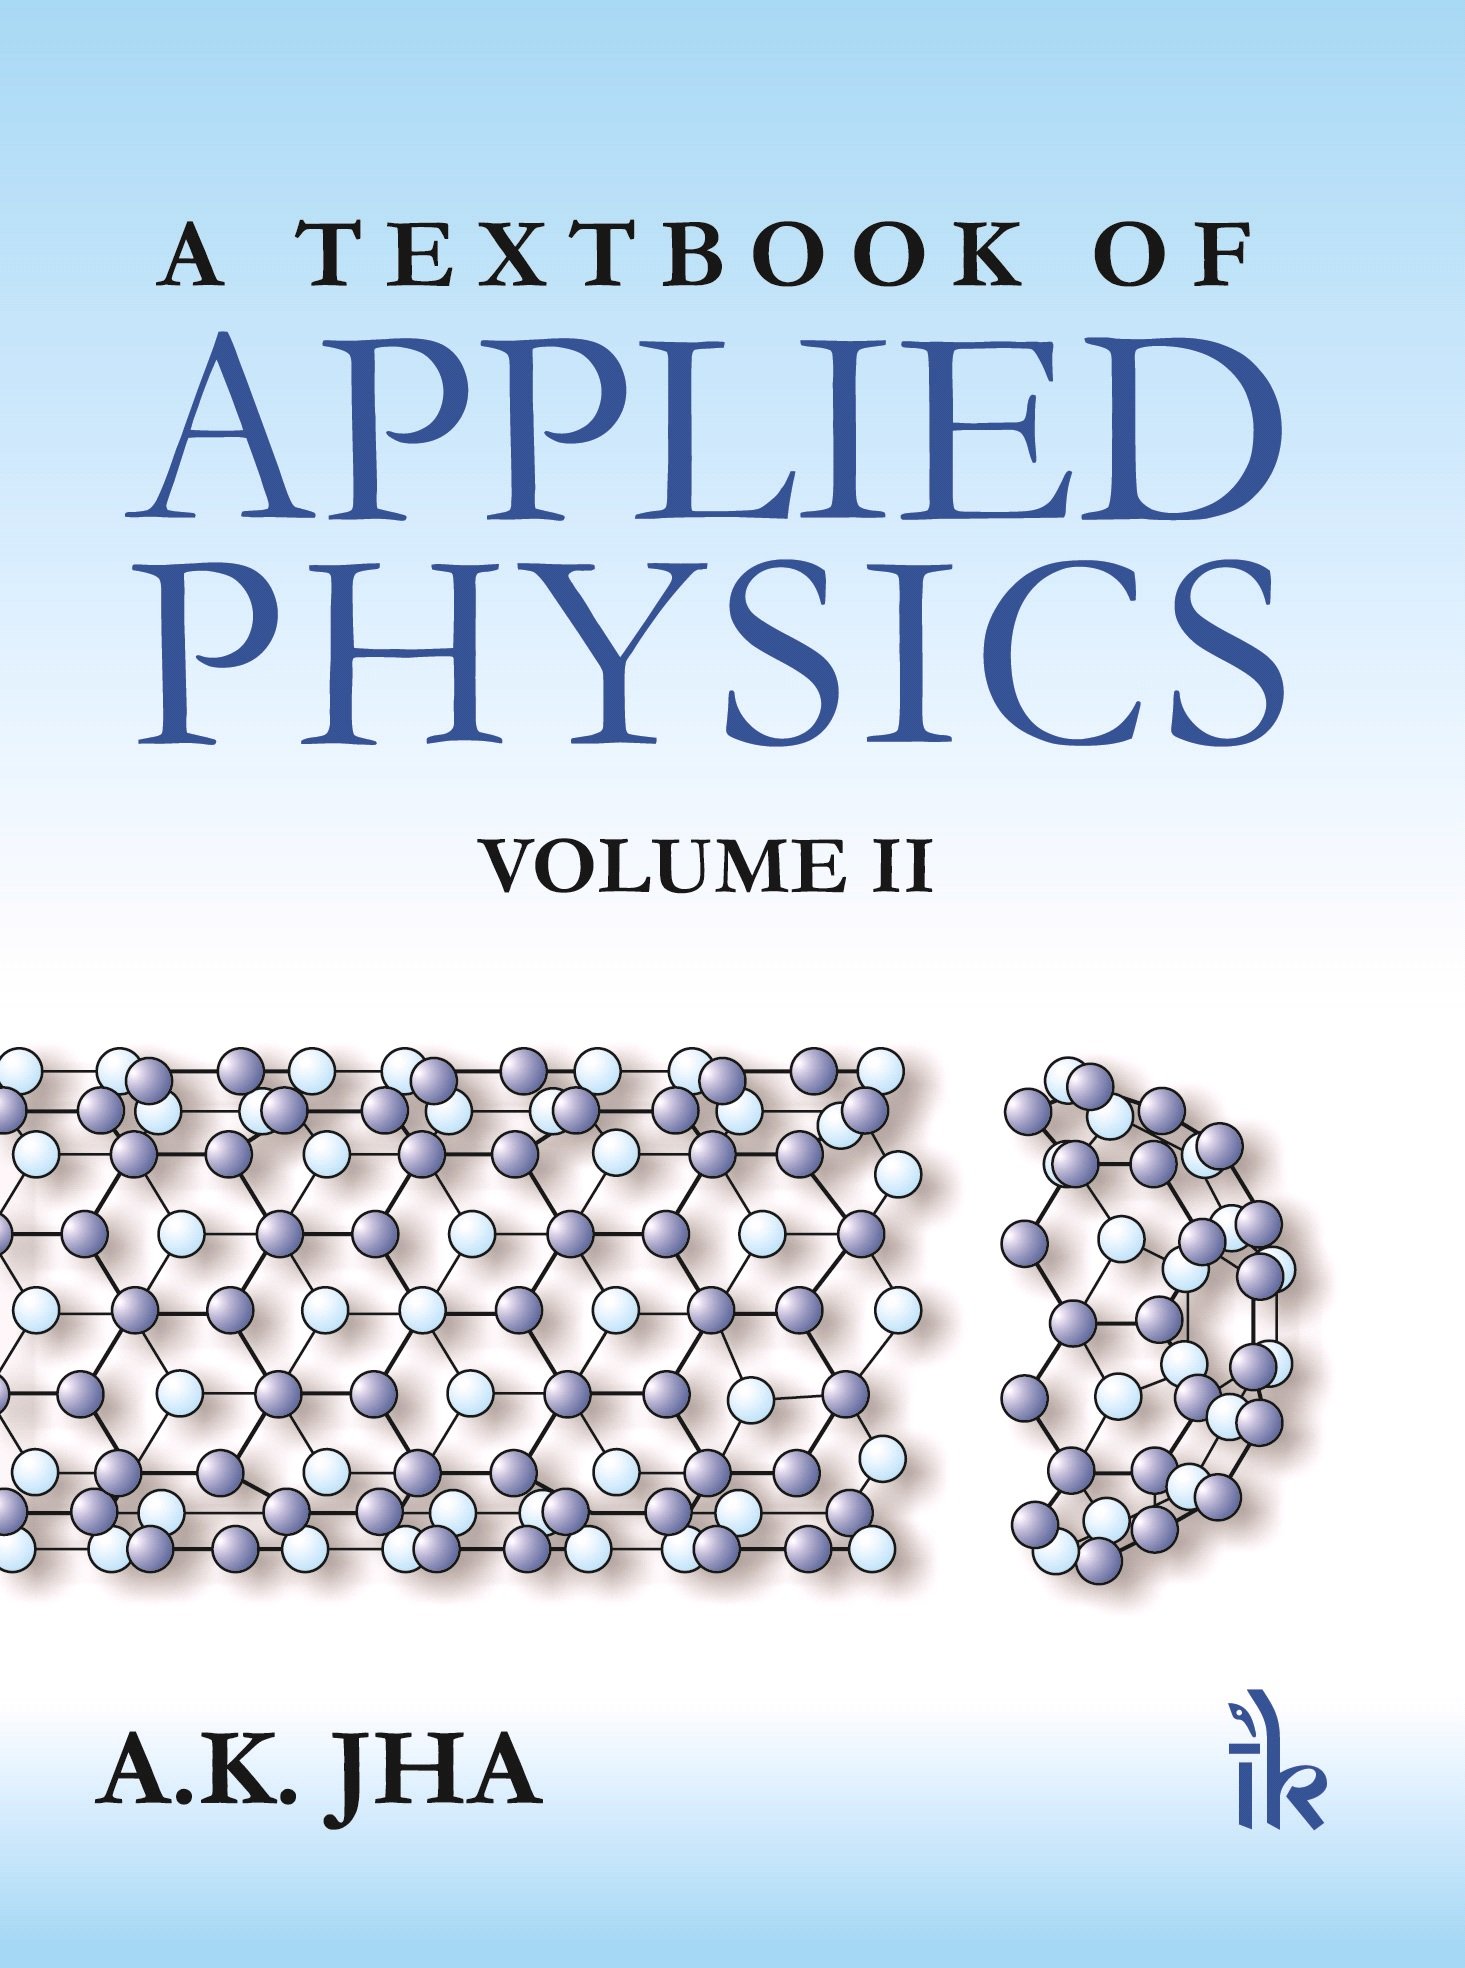 a textbook of applied physics by a k jha pdf file